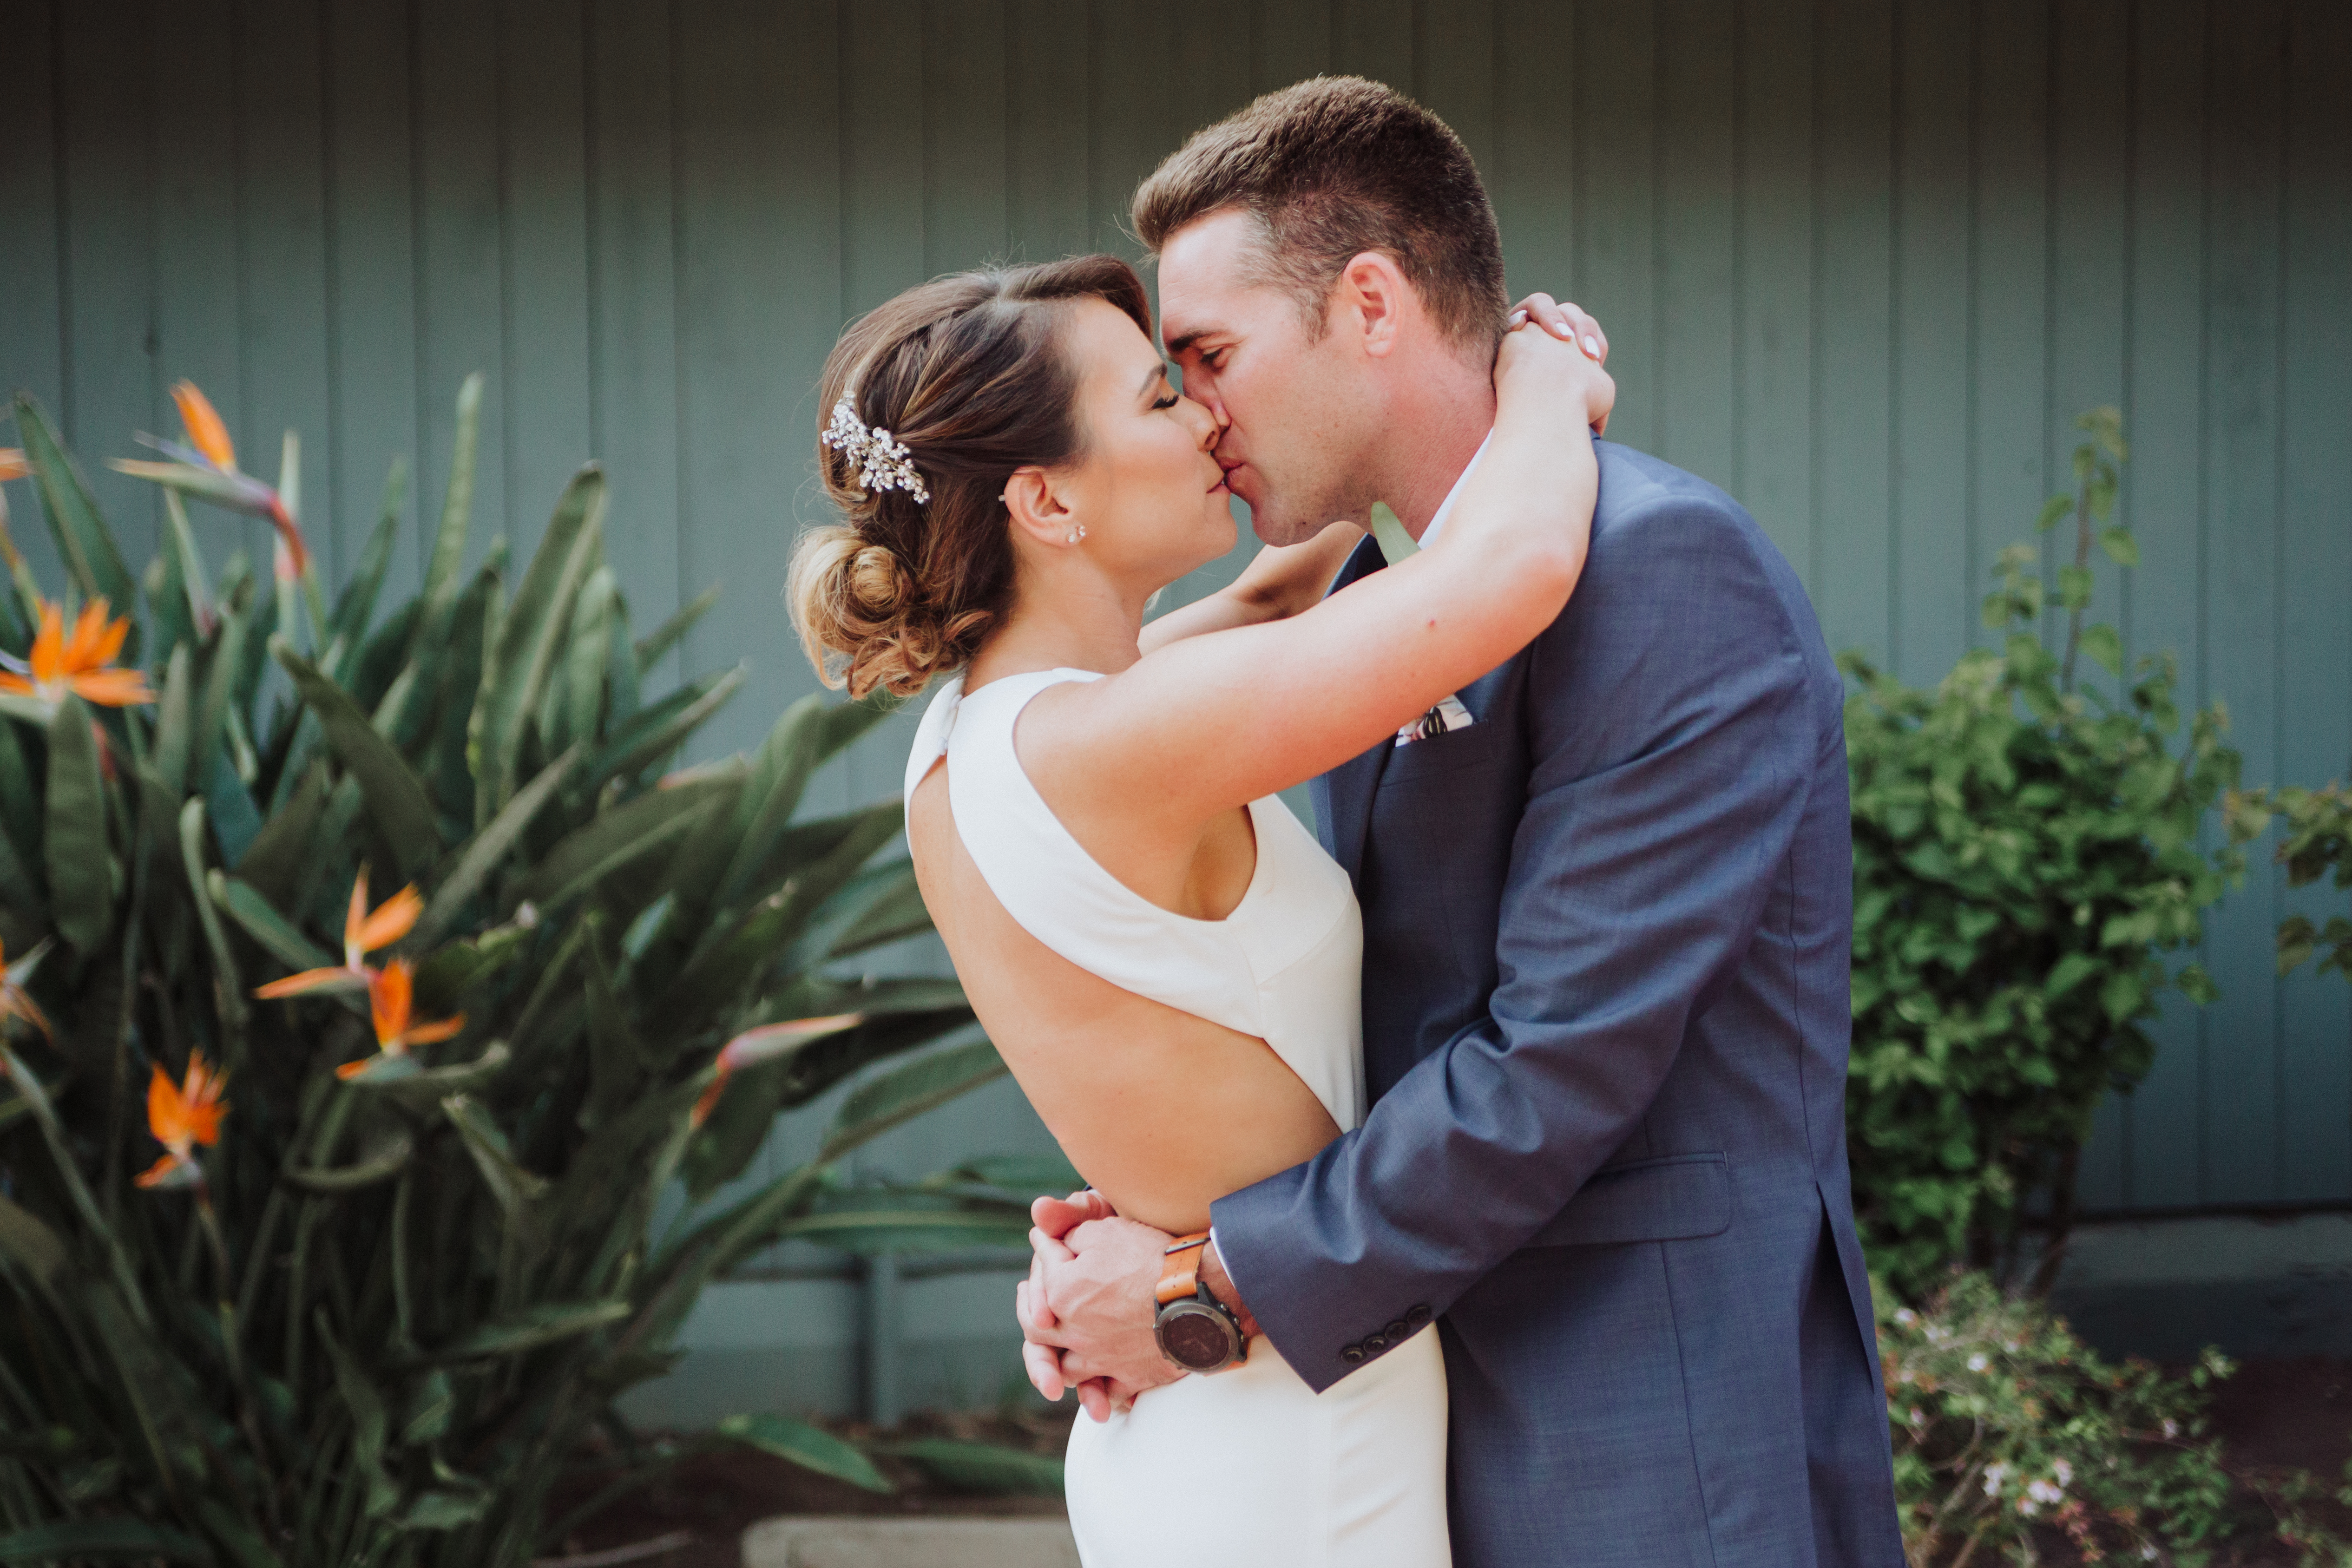 First lookat a Romantic Style San Diego Wedding at Marina Village by Kylie Rae Photography